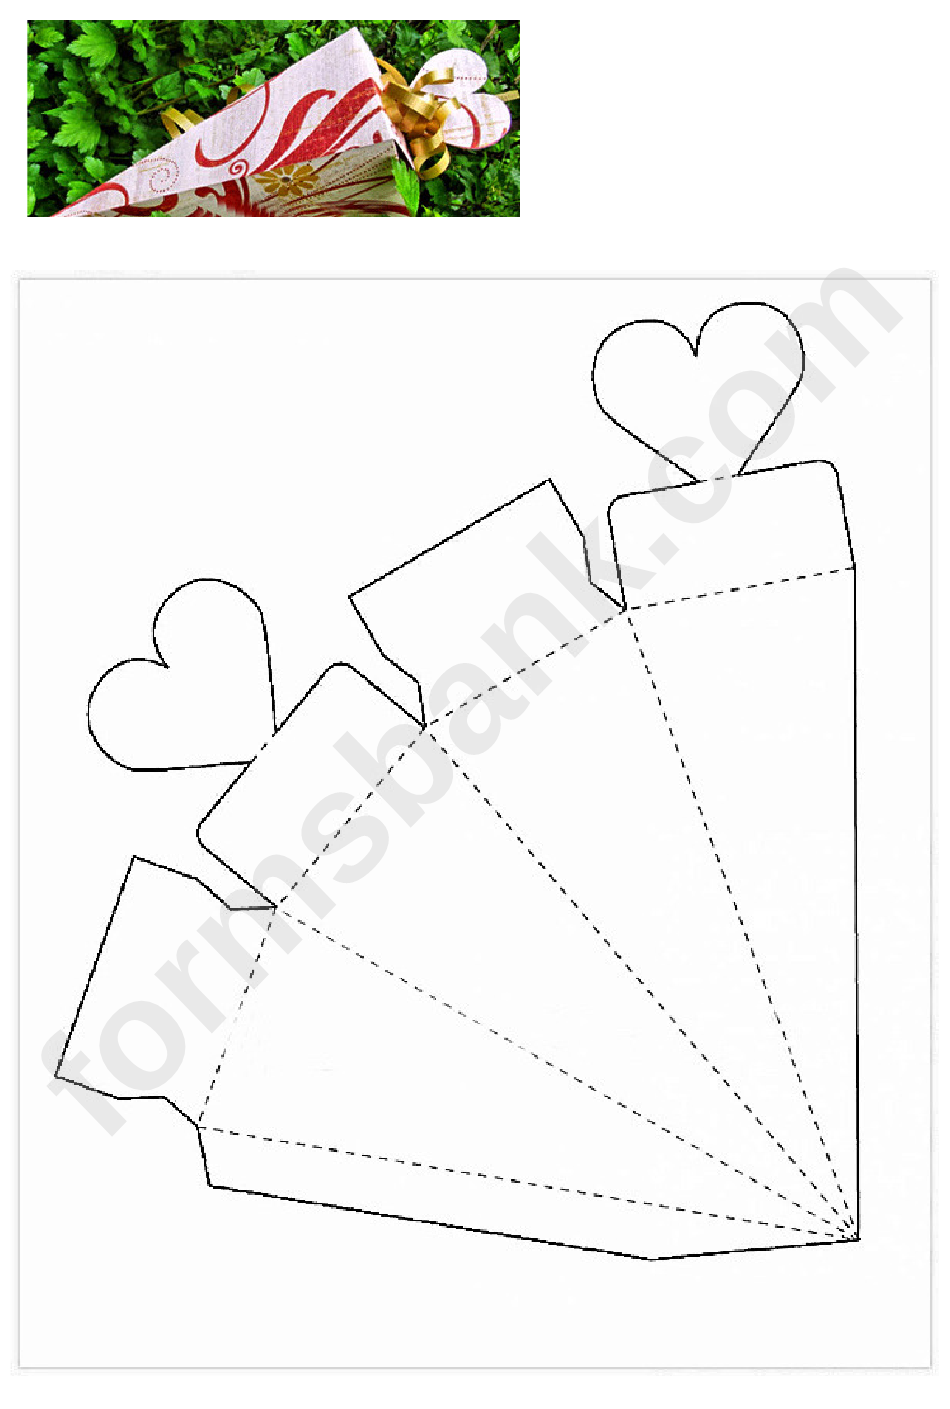 cone-gift-box-with-hearts-template-printable-pdf-download